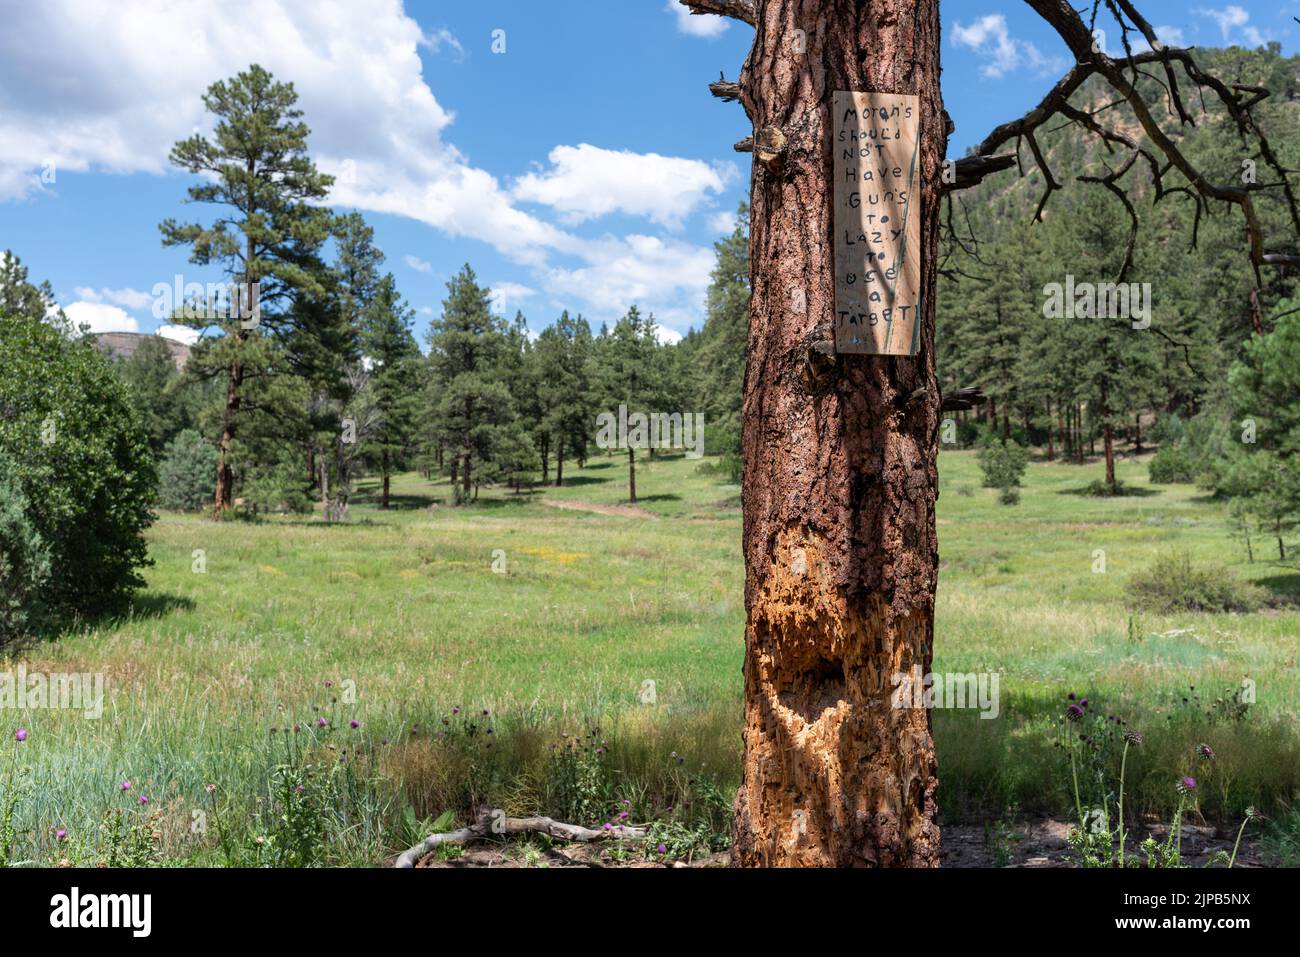 A pine tree with bullet holes and splintered wood on U.S. Forest land that has been used illegally for target practice. Stock Photo